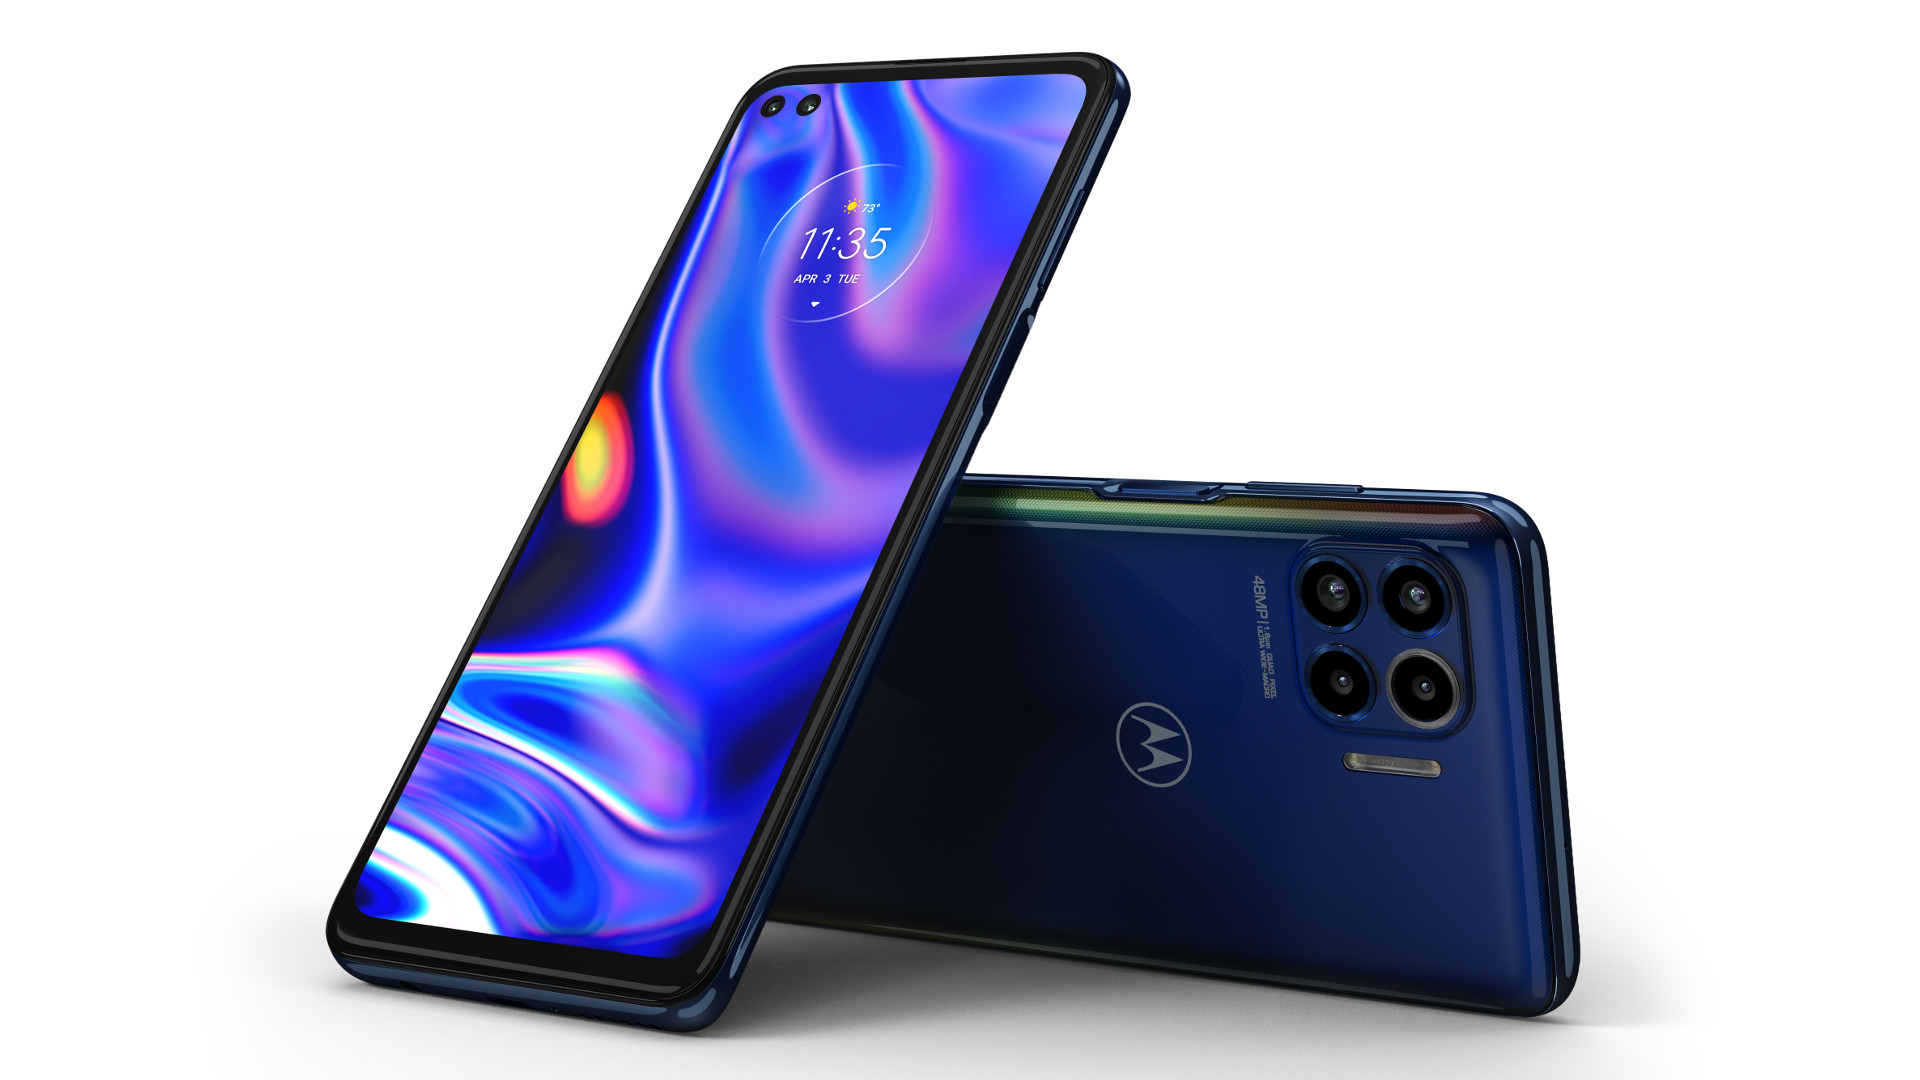 Motorola One 5G Smartphone Review in Hindi Smartphone Price in India specification Feature Camera RAM Storage Battery, भारत में कब होगा मोटरोला वन 5G स्मार्टफोन